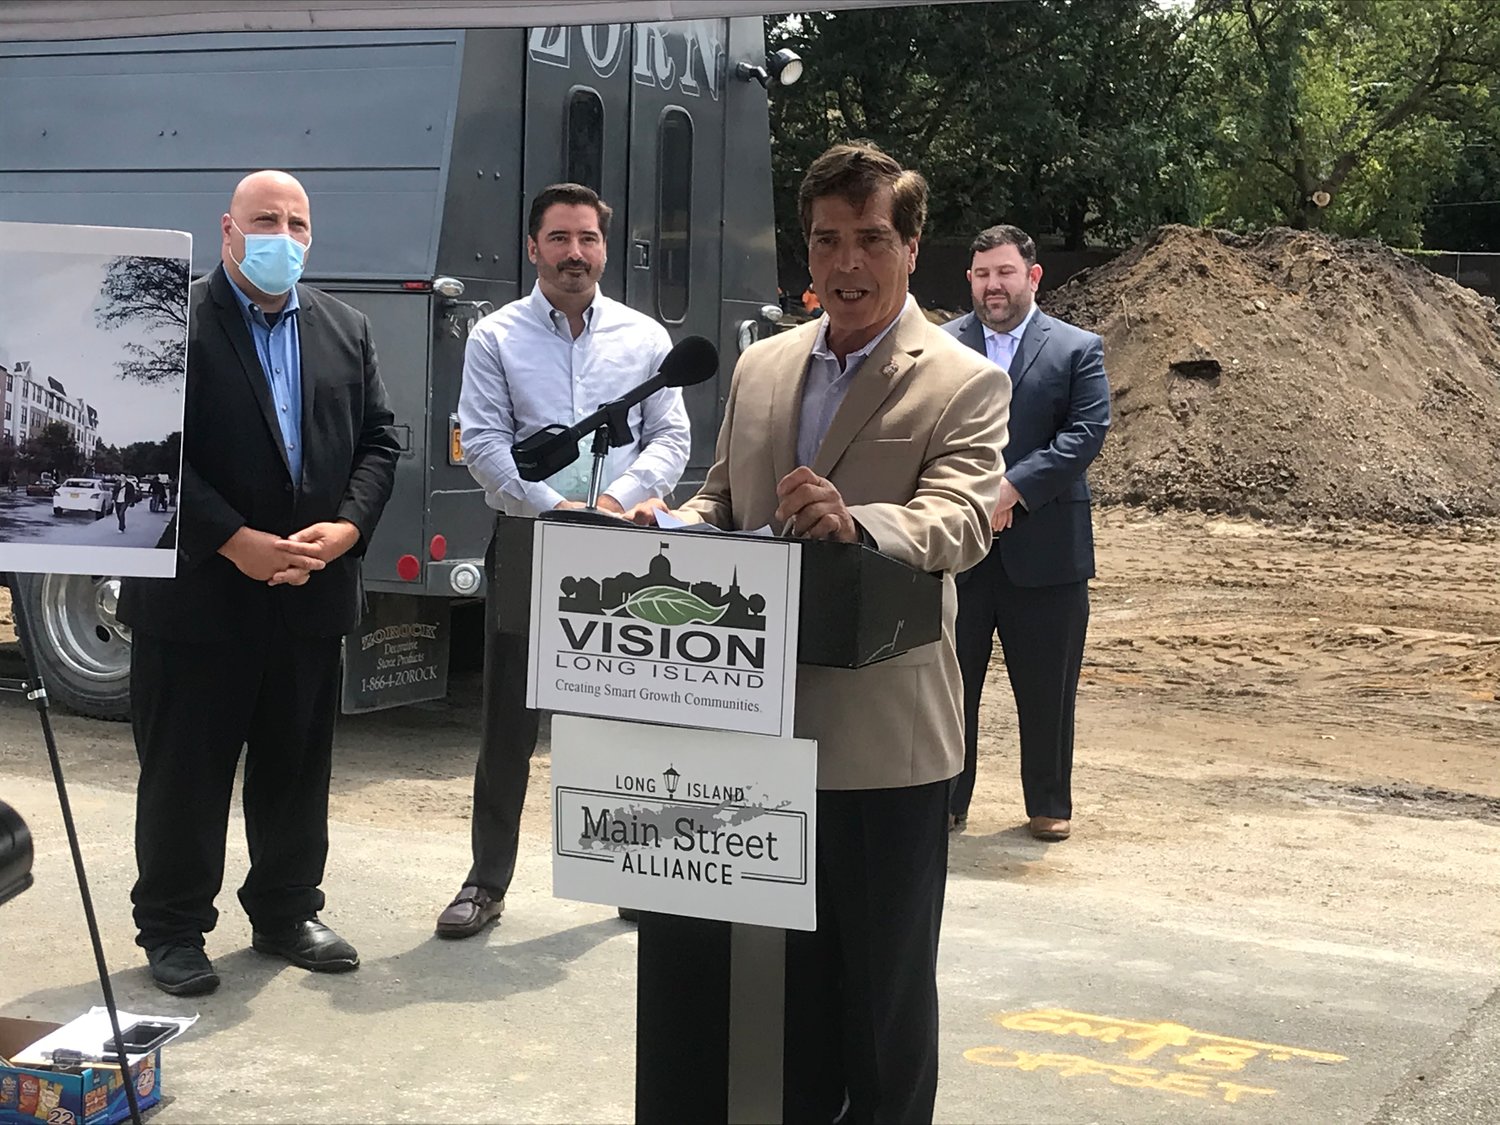 Lynbrook Mayor Alan Beach, at lecturn, and developer Anthony Bartone were presented with Smart Growth Awards from Vision Long Island on Aug. 6 for the forthcoming Cornerstone at Yorkshire project. Beach spoke about the importance of the project.